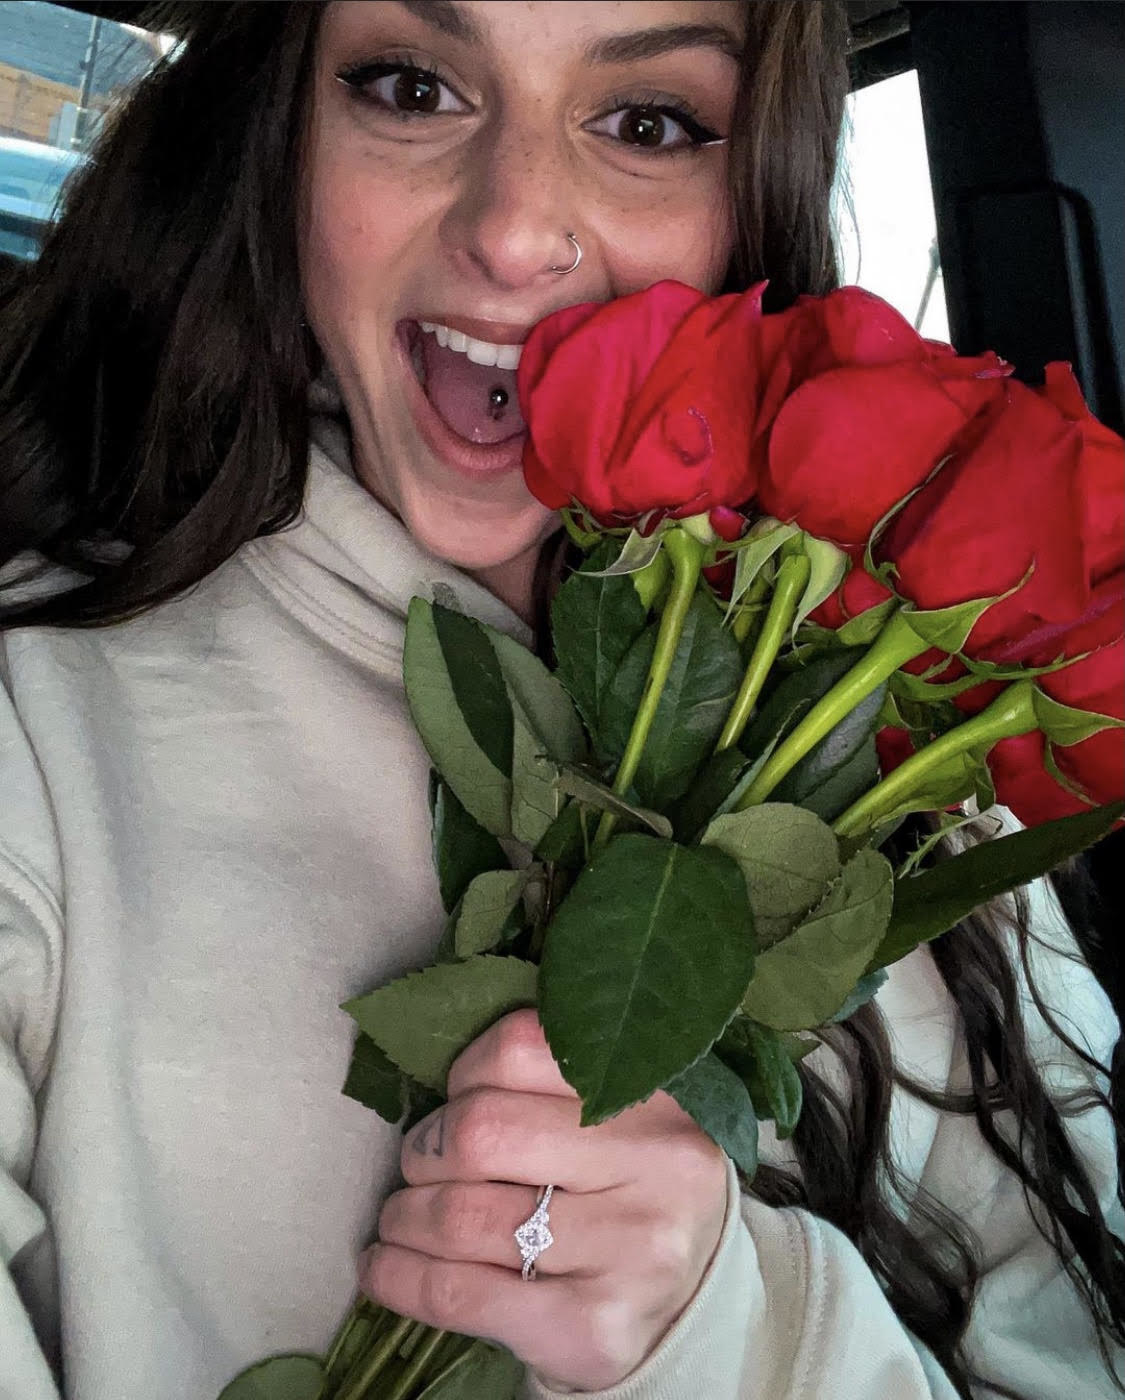 Danielle widely smiles as she holds a bouquet of roses and shows off an engagement ring